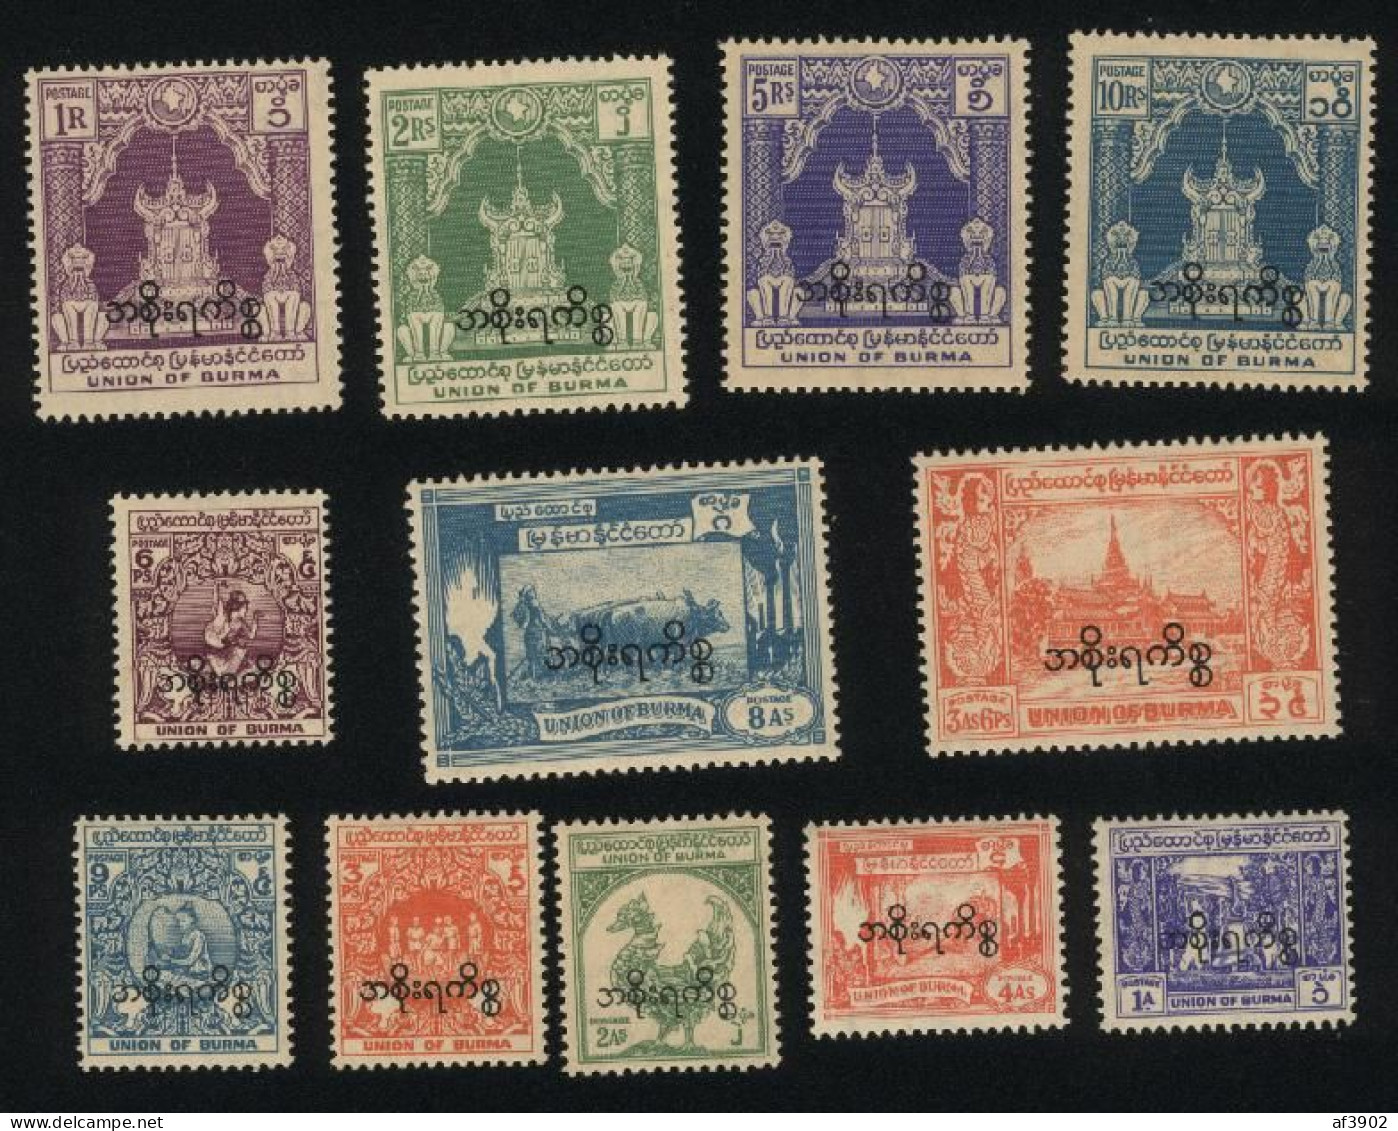 BURMA-MYANMAR STAMP 1952 ISSUED INDEPENDENCE DAY SERVICE COMPLETE SET, MNH - Myanmar (Burma 1948-...)